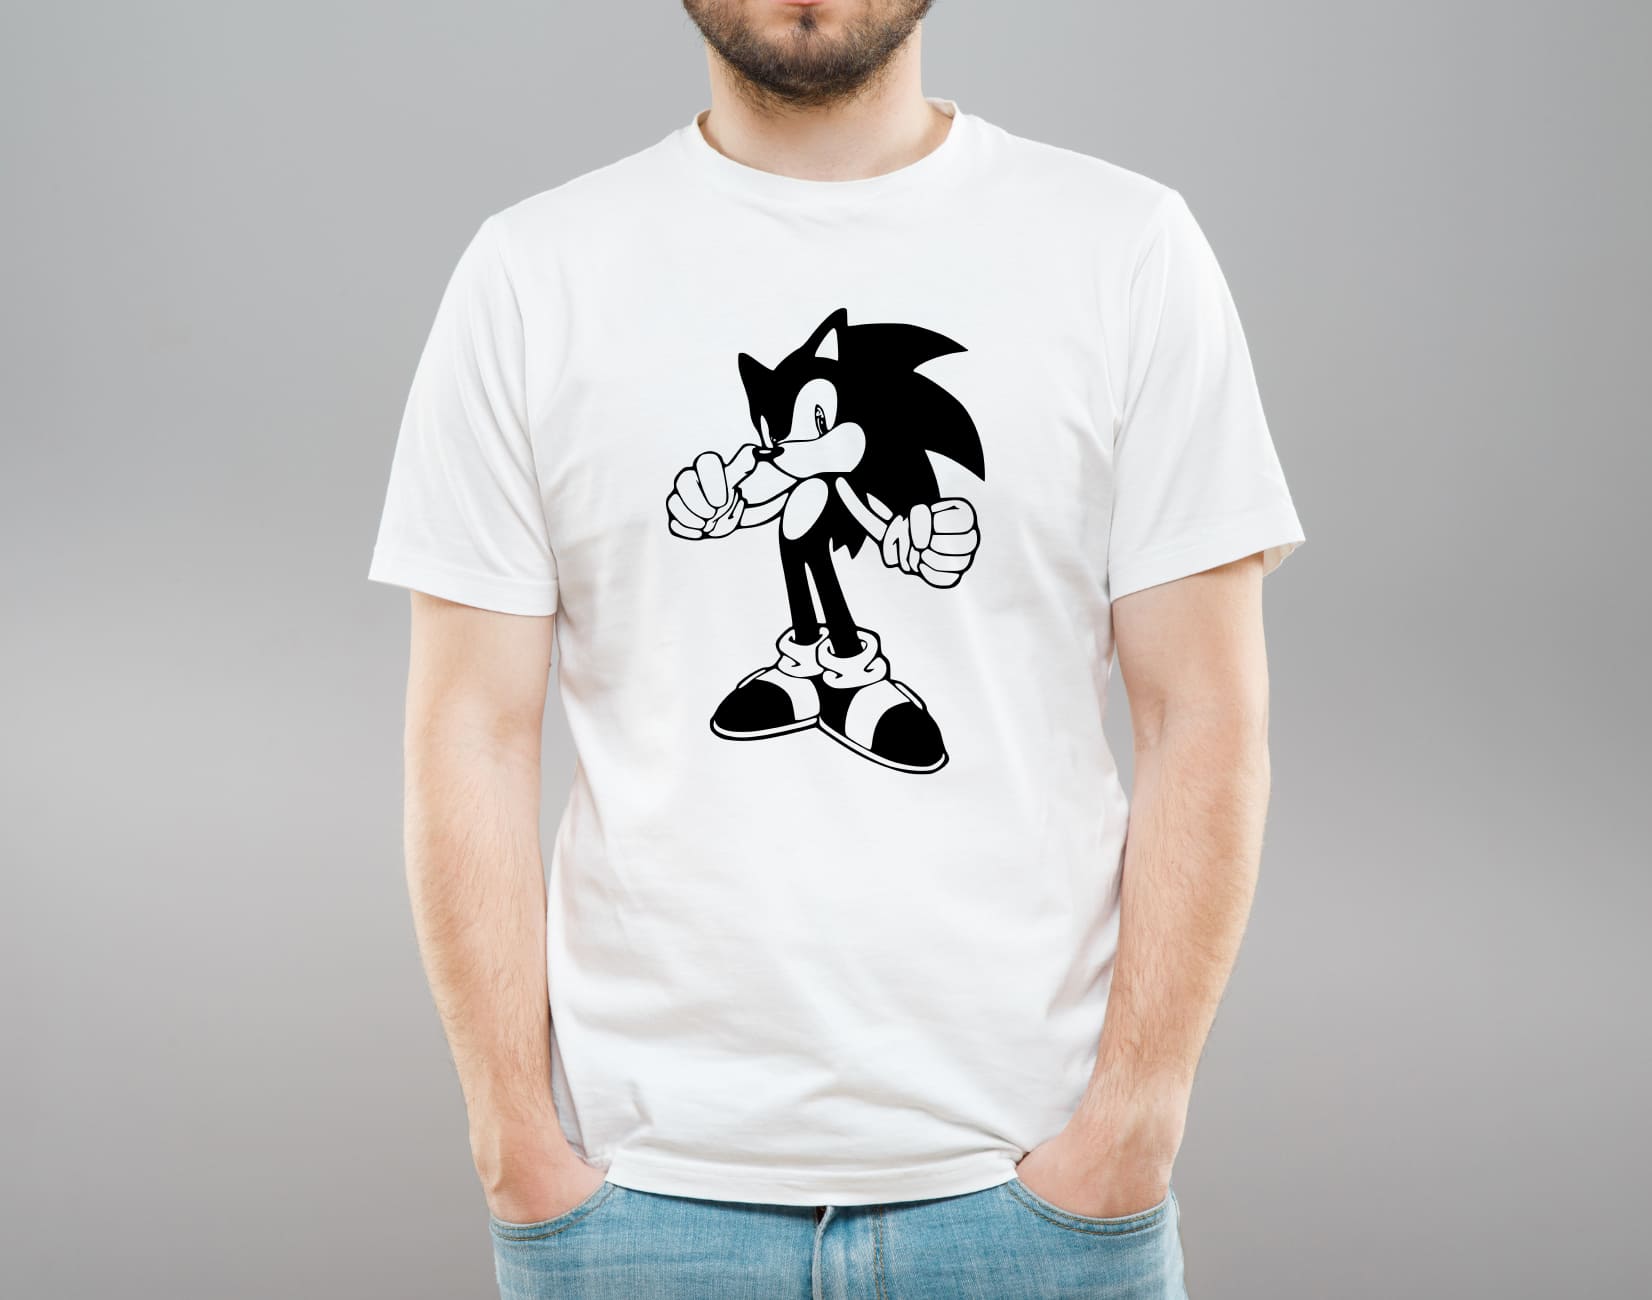 Silhouette sonic for your t-shirt.